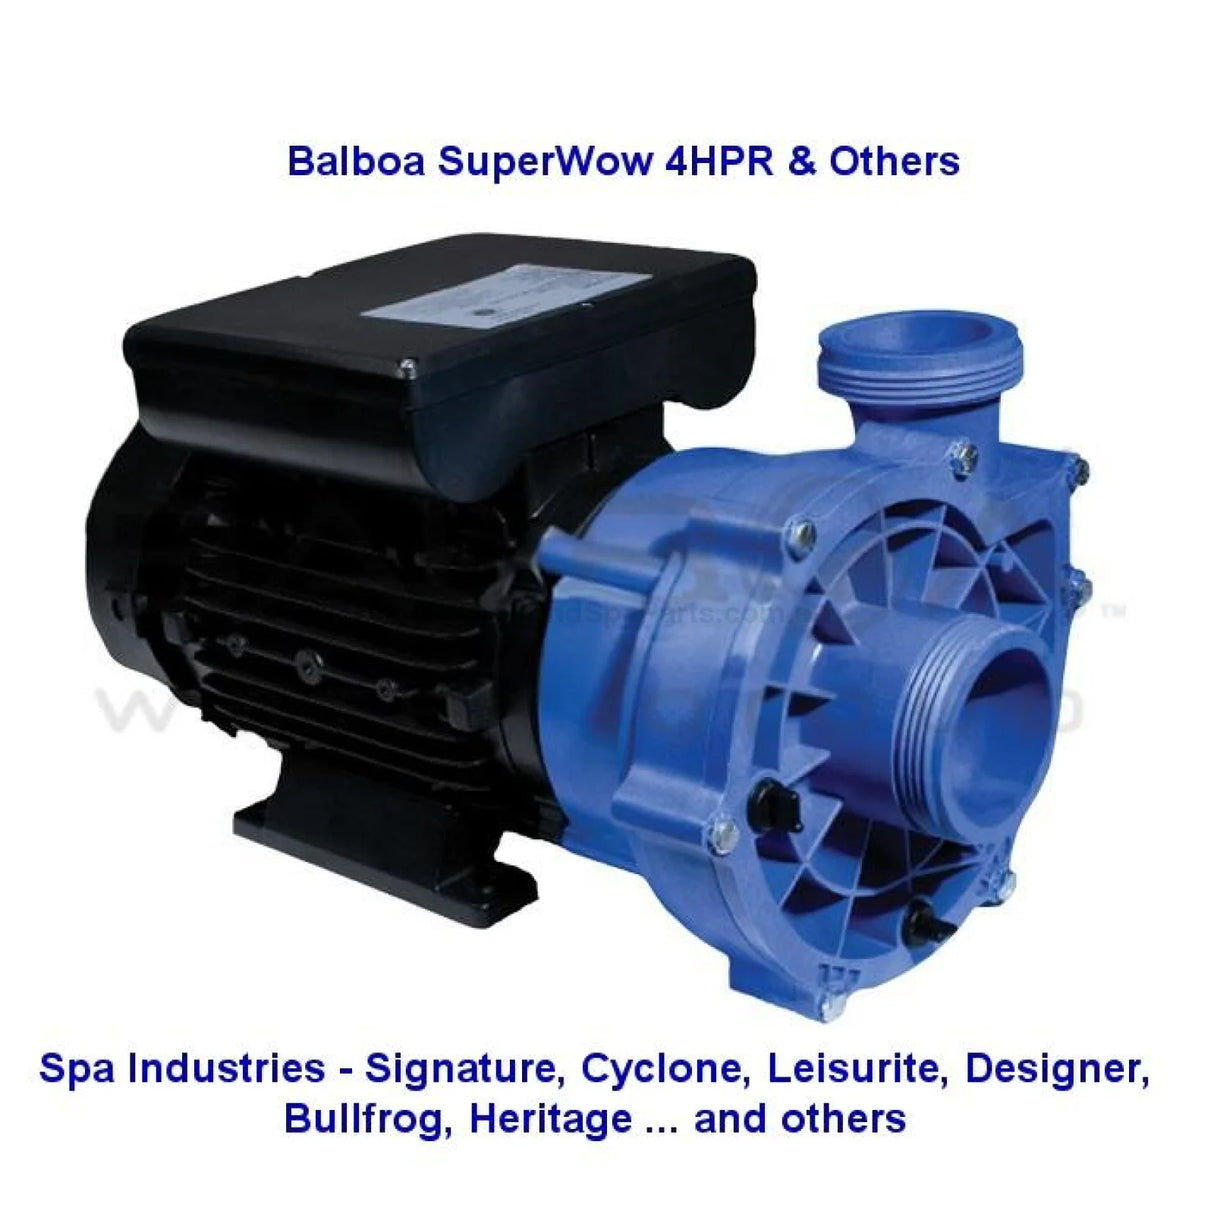 Balboa SuperWow Vico Ultimax Spa Jet Booster Pumps - UM EME 4HPR / 2HP - 1 & 2 Speed Versions - Heater and Spa Parts